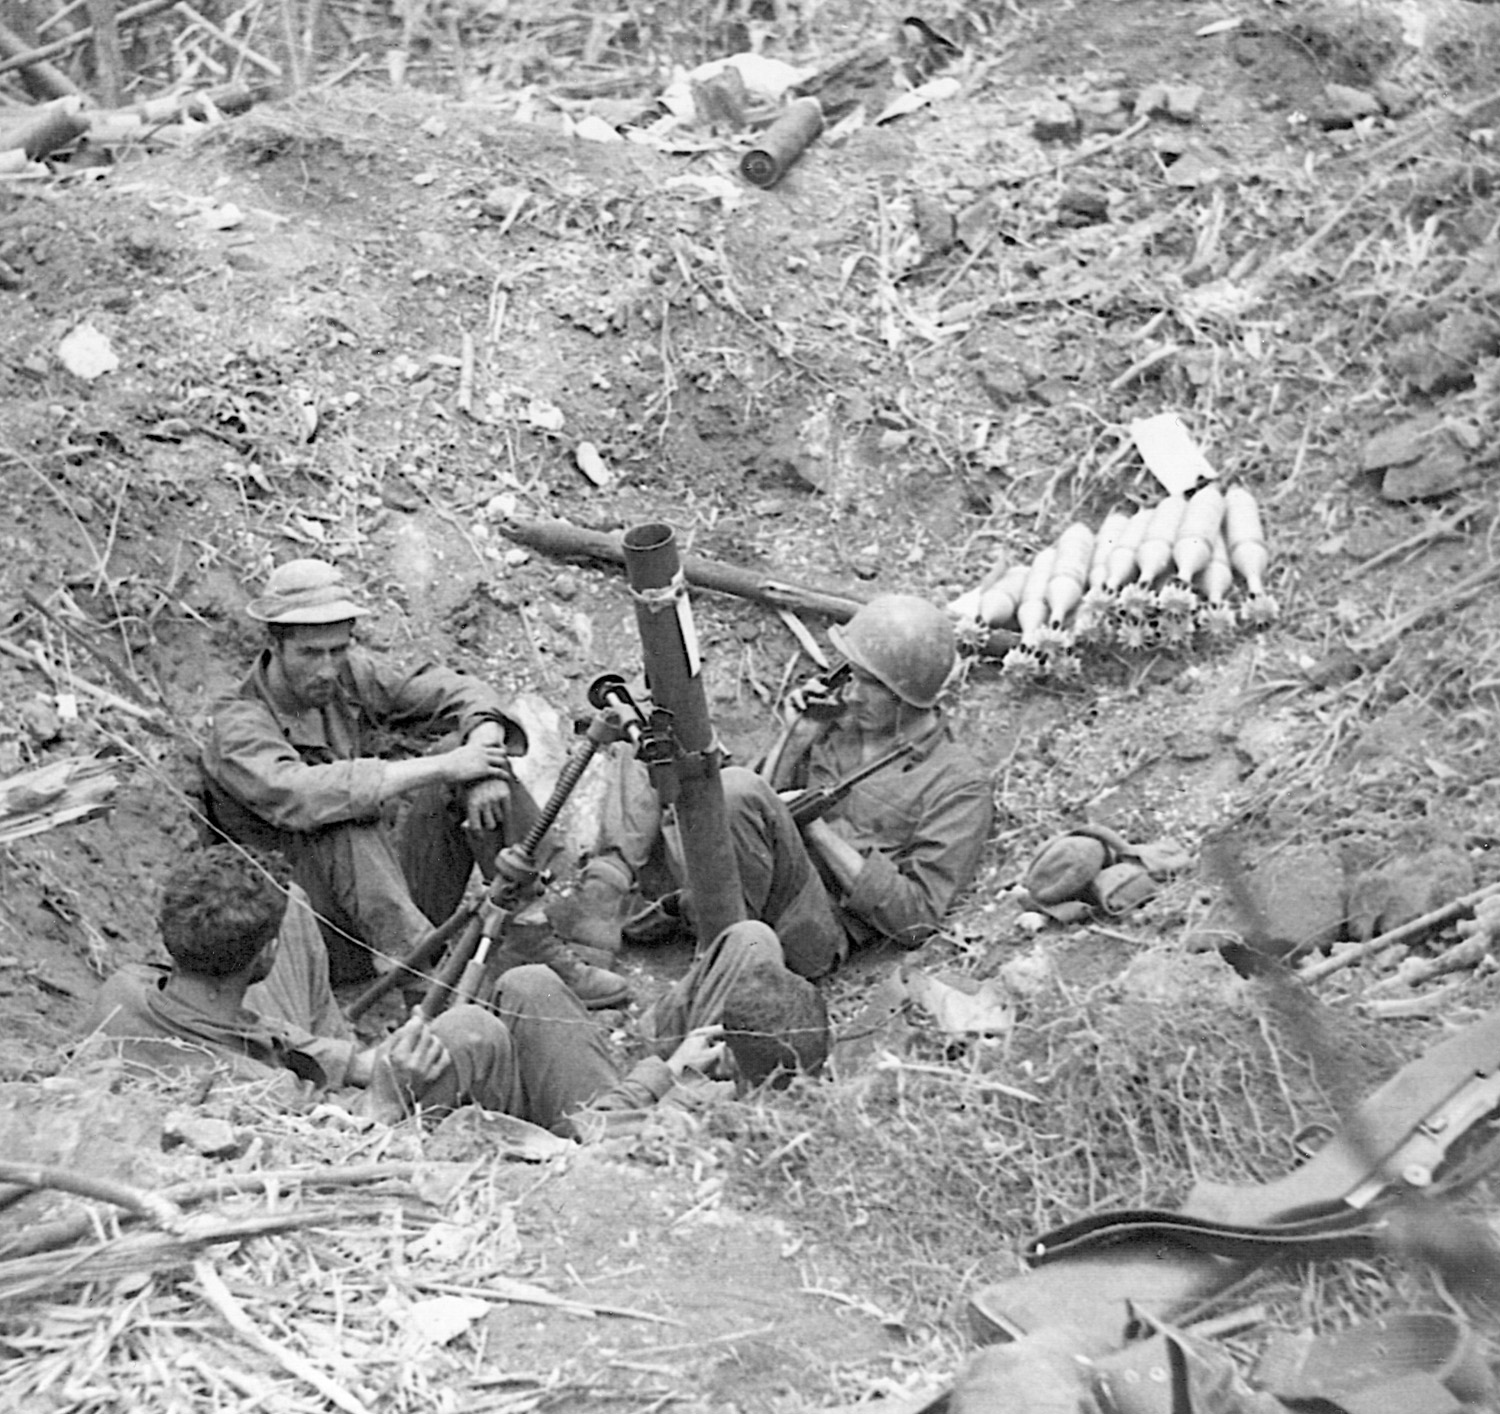 Set up in a bomb crater, the crew of an 81mm mortar awaits the order to fire on the Japanese.